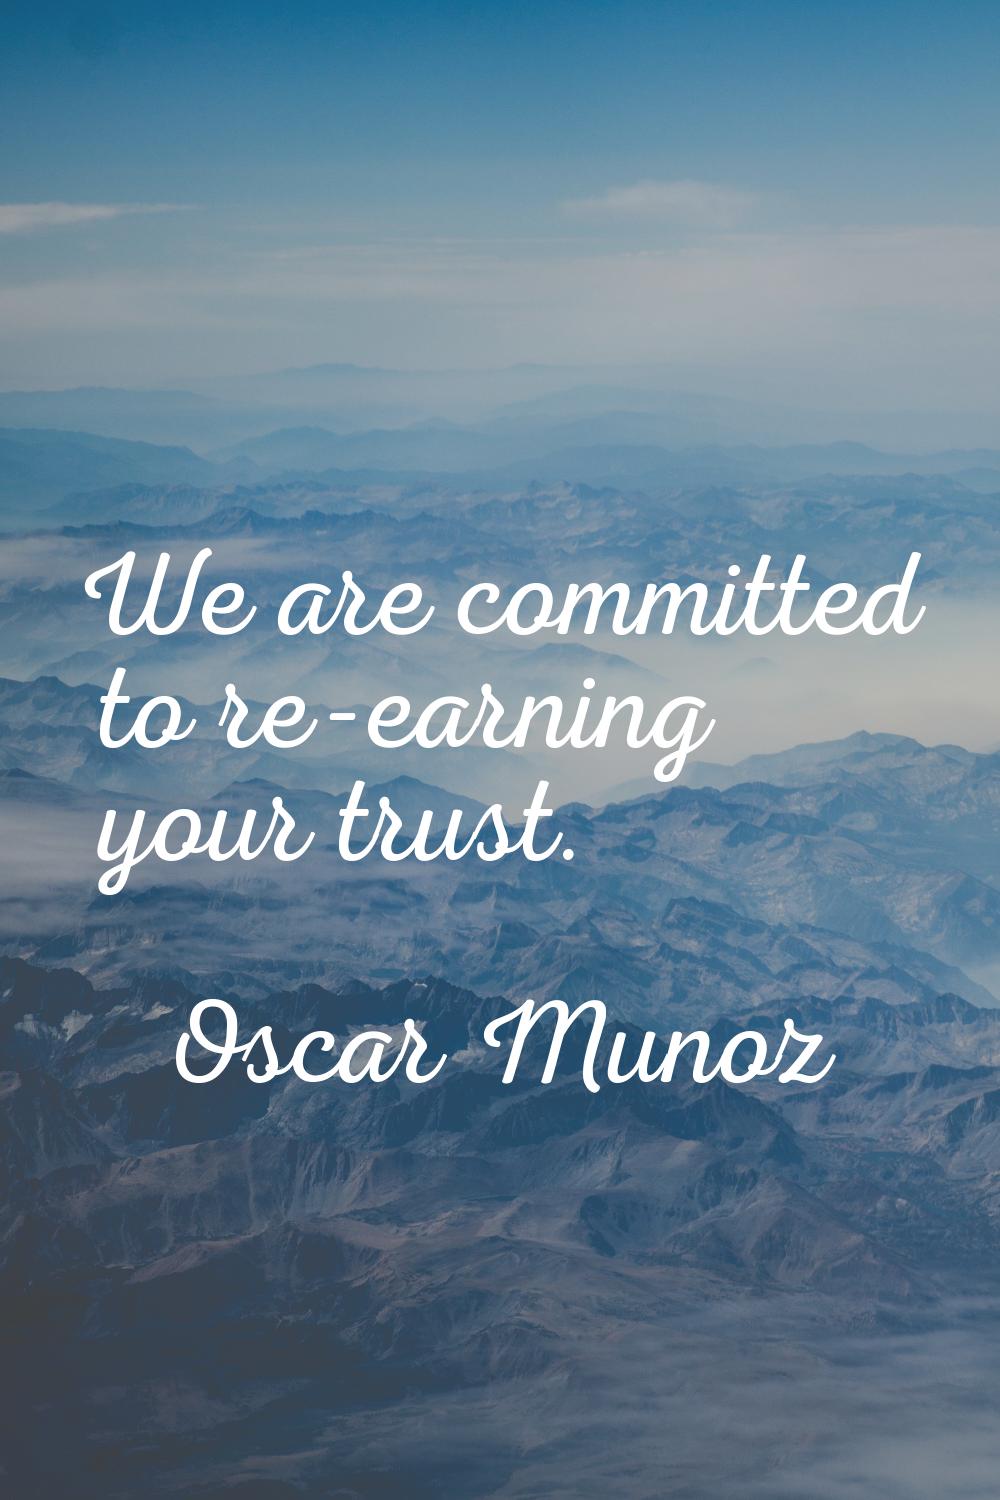 We are committed to re-earning your trust.